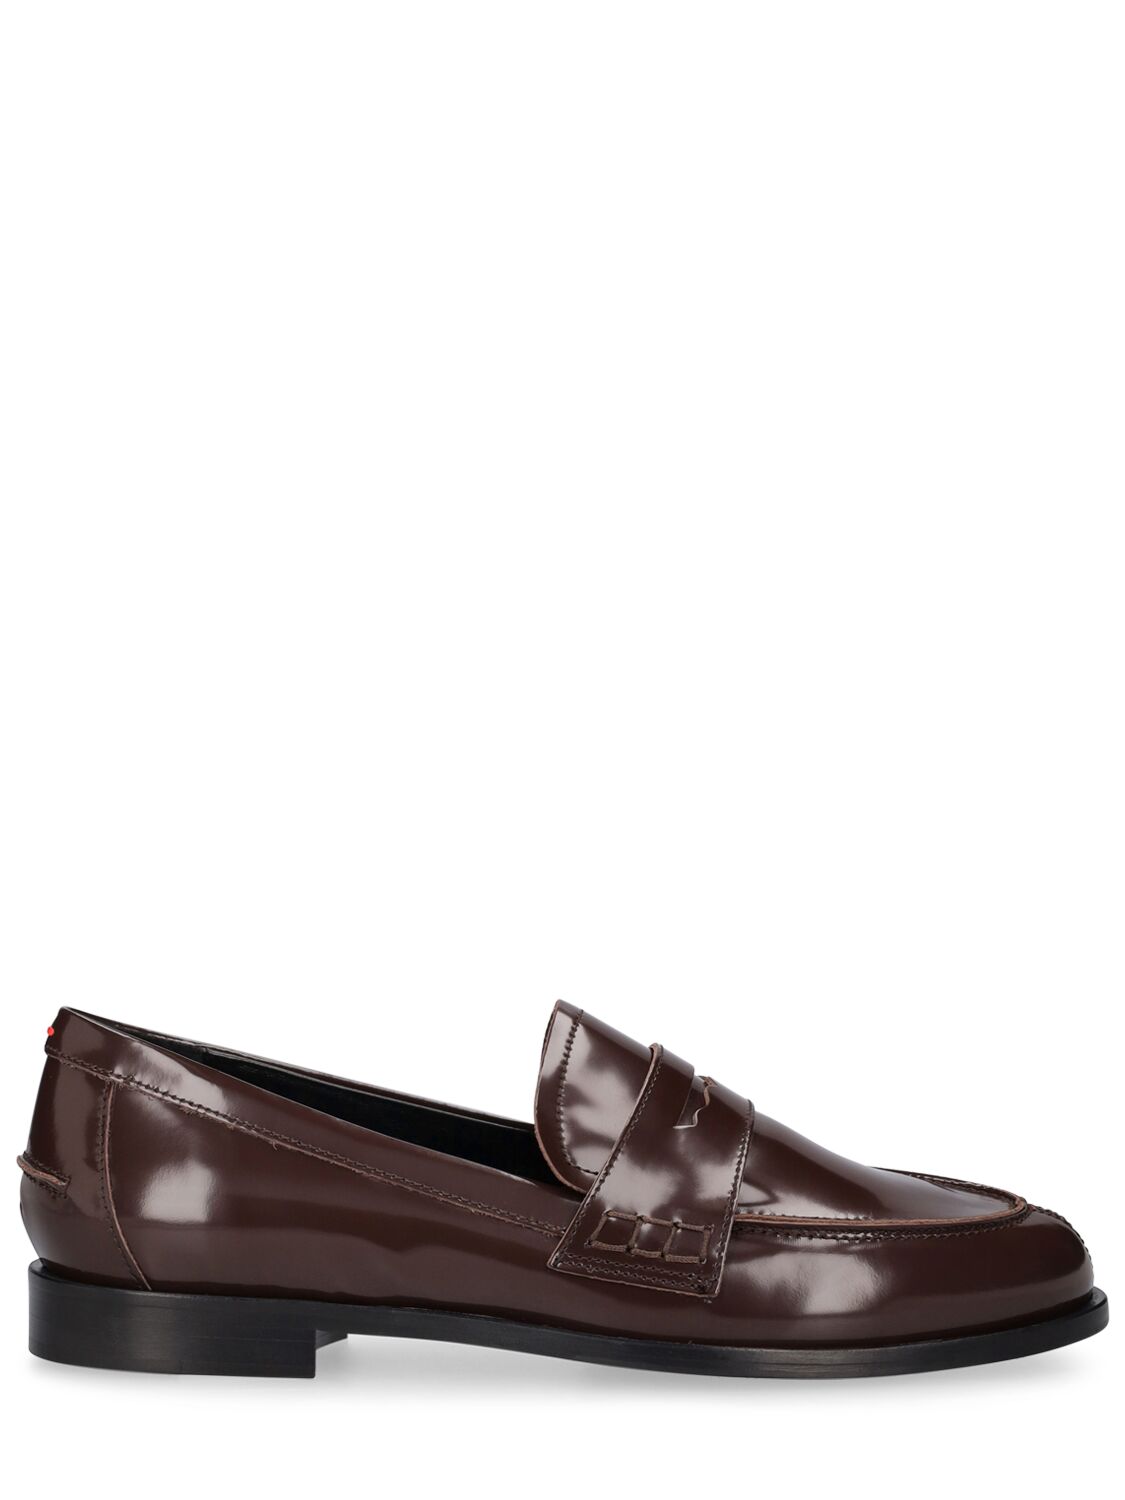 15mm Oscar Polido Leather Loafers